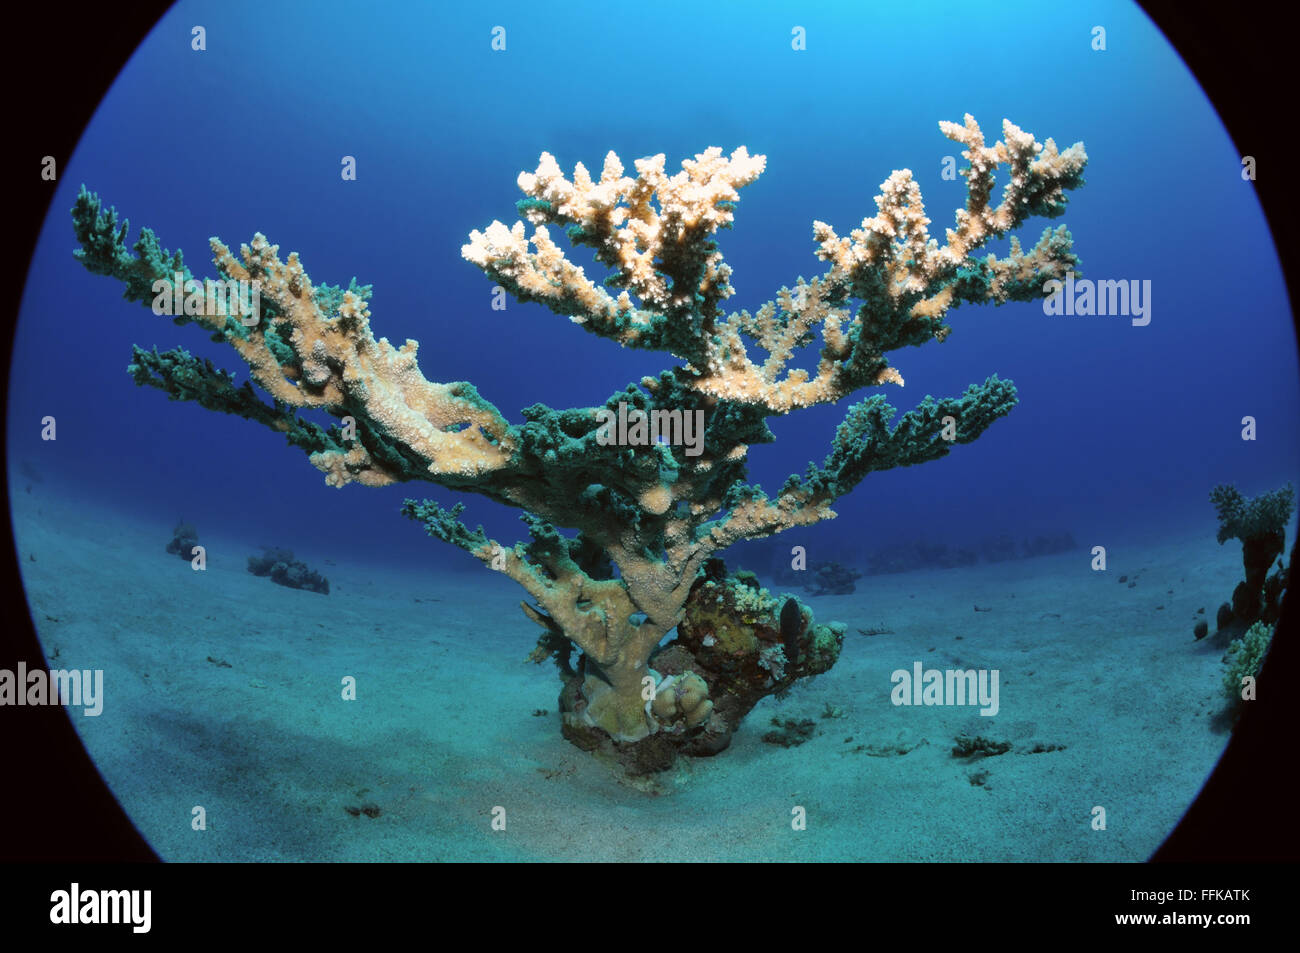 isolated acropora coral growing on a sandy seabed, Marsa Alam, Egypt, Red Sea Stock Photo